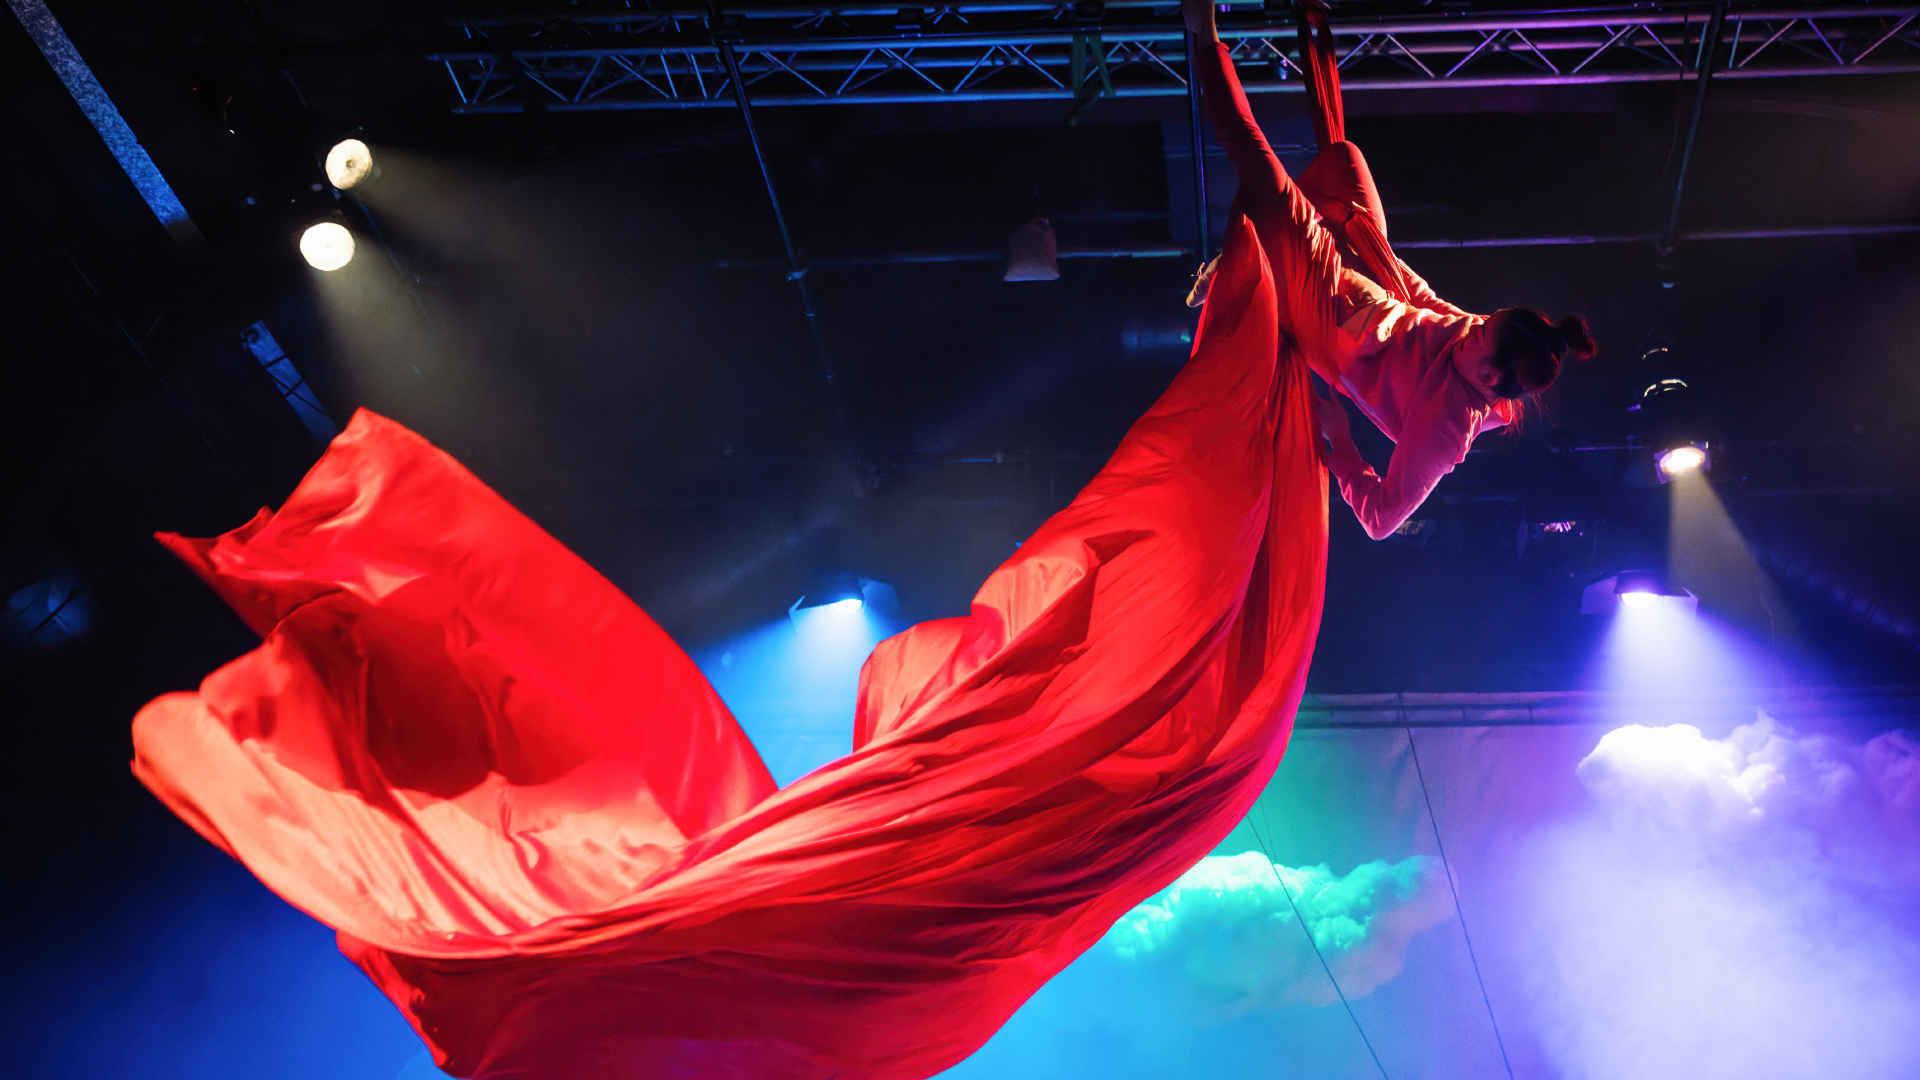 A person hangs upside down on red silks.